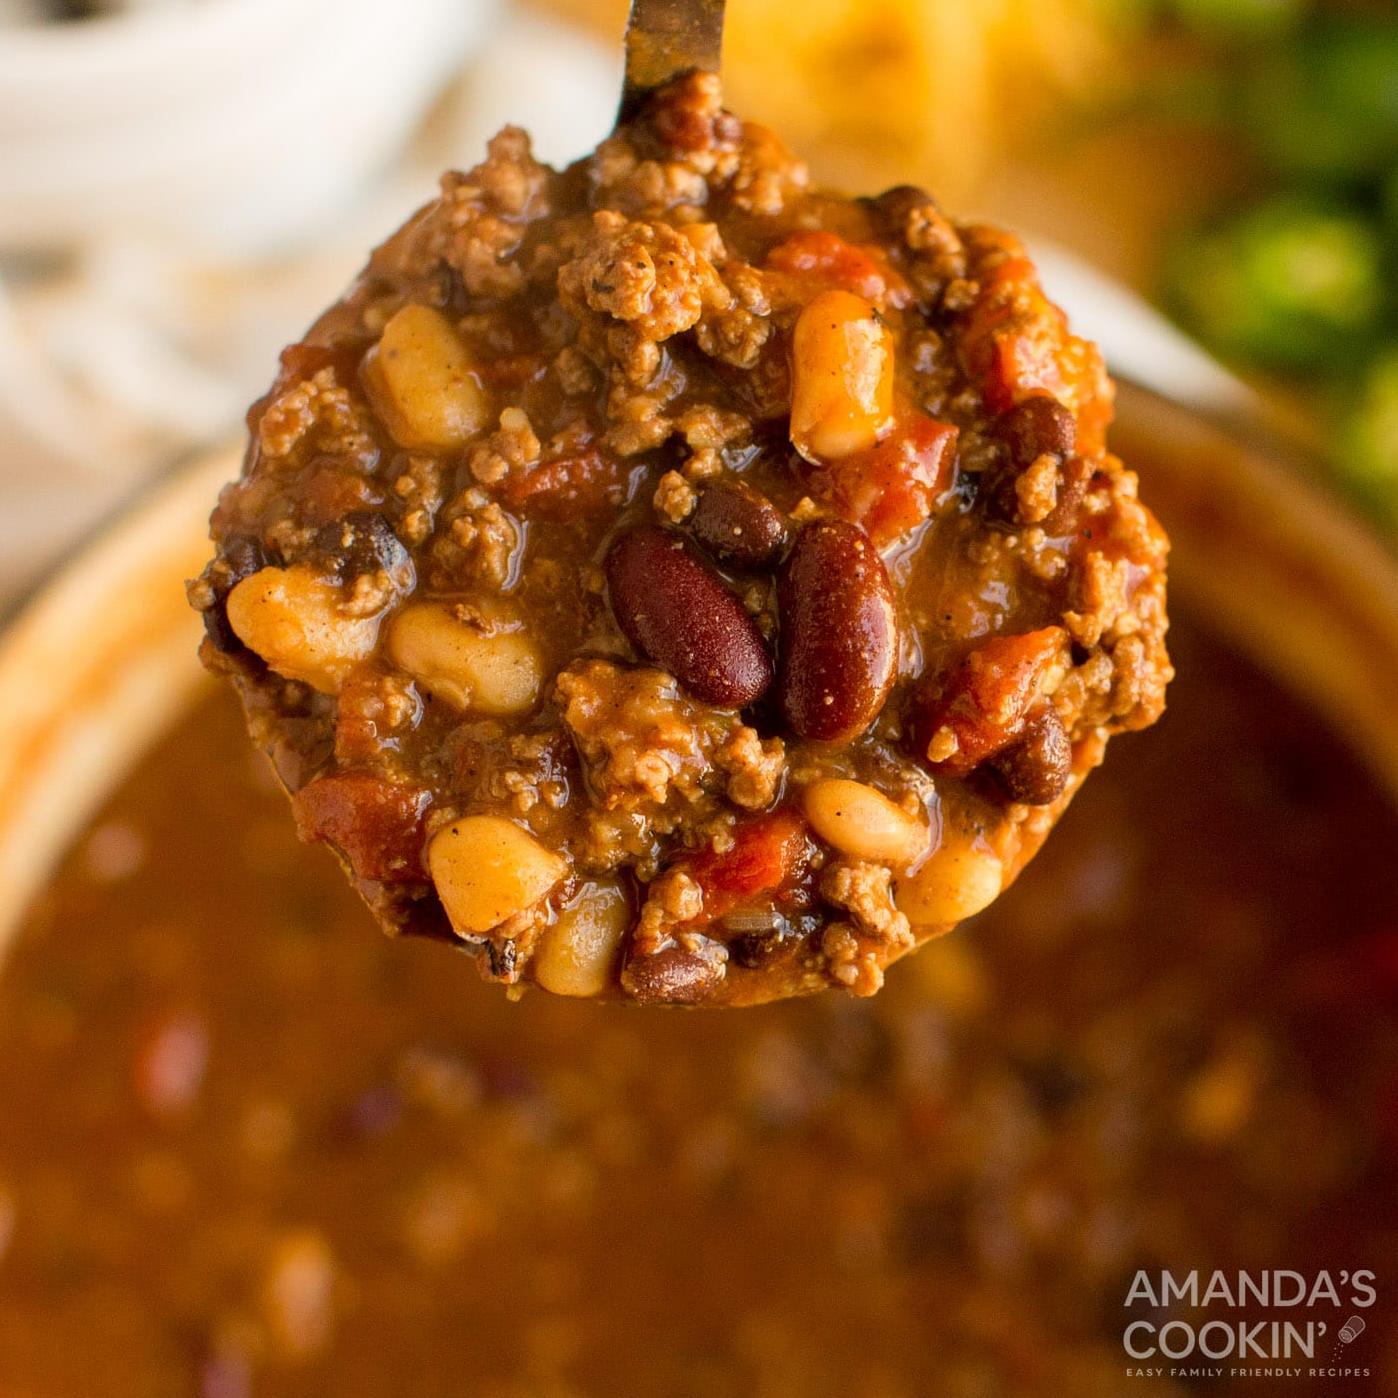  Coffee and chili may seem like an unlikely pair, but trust us, it's a match made in flavor heaven.